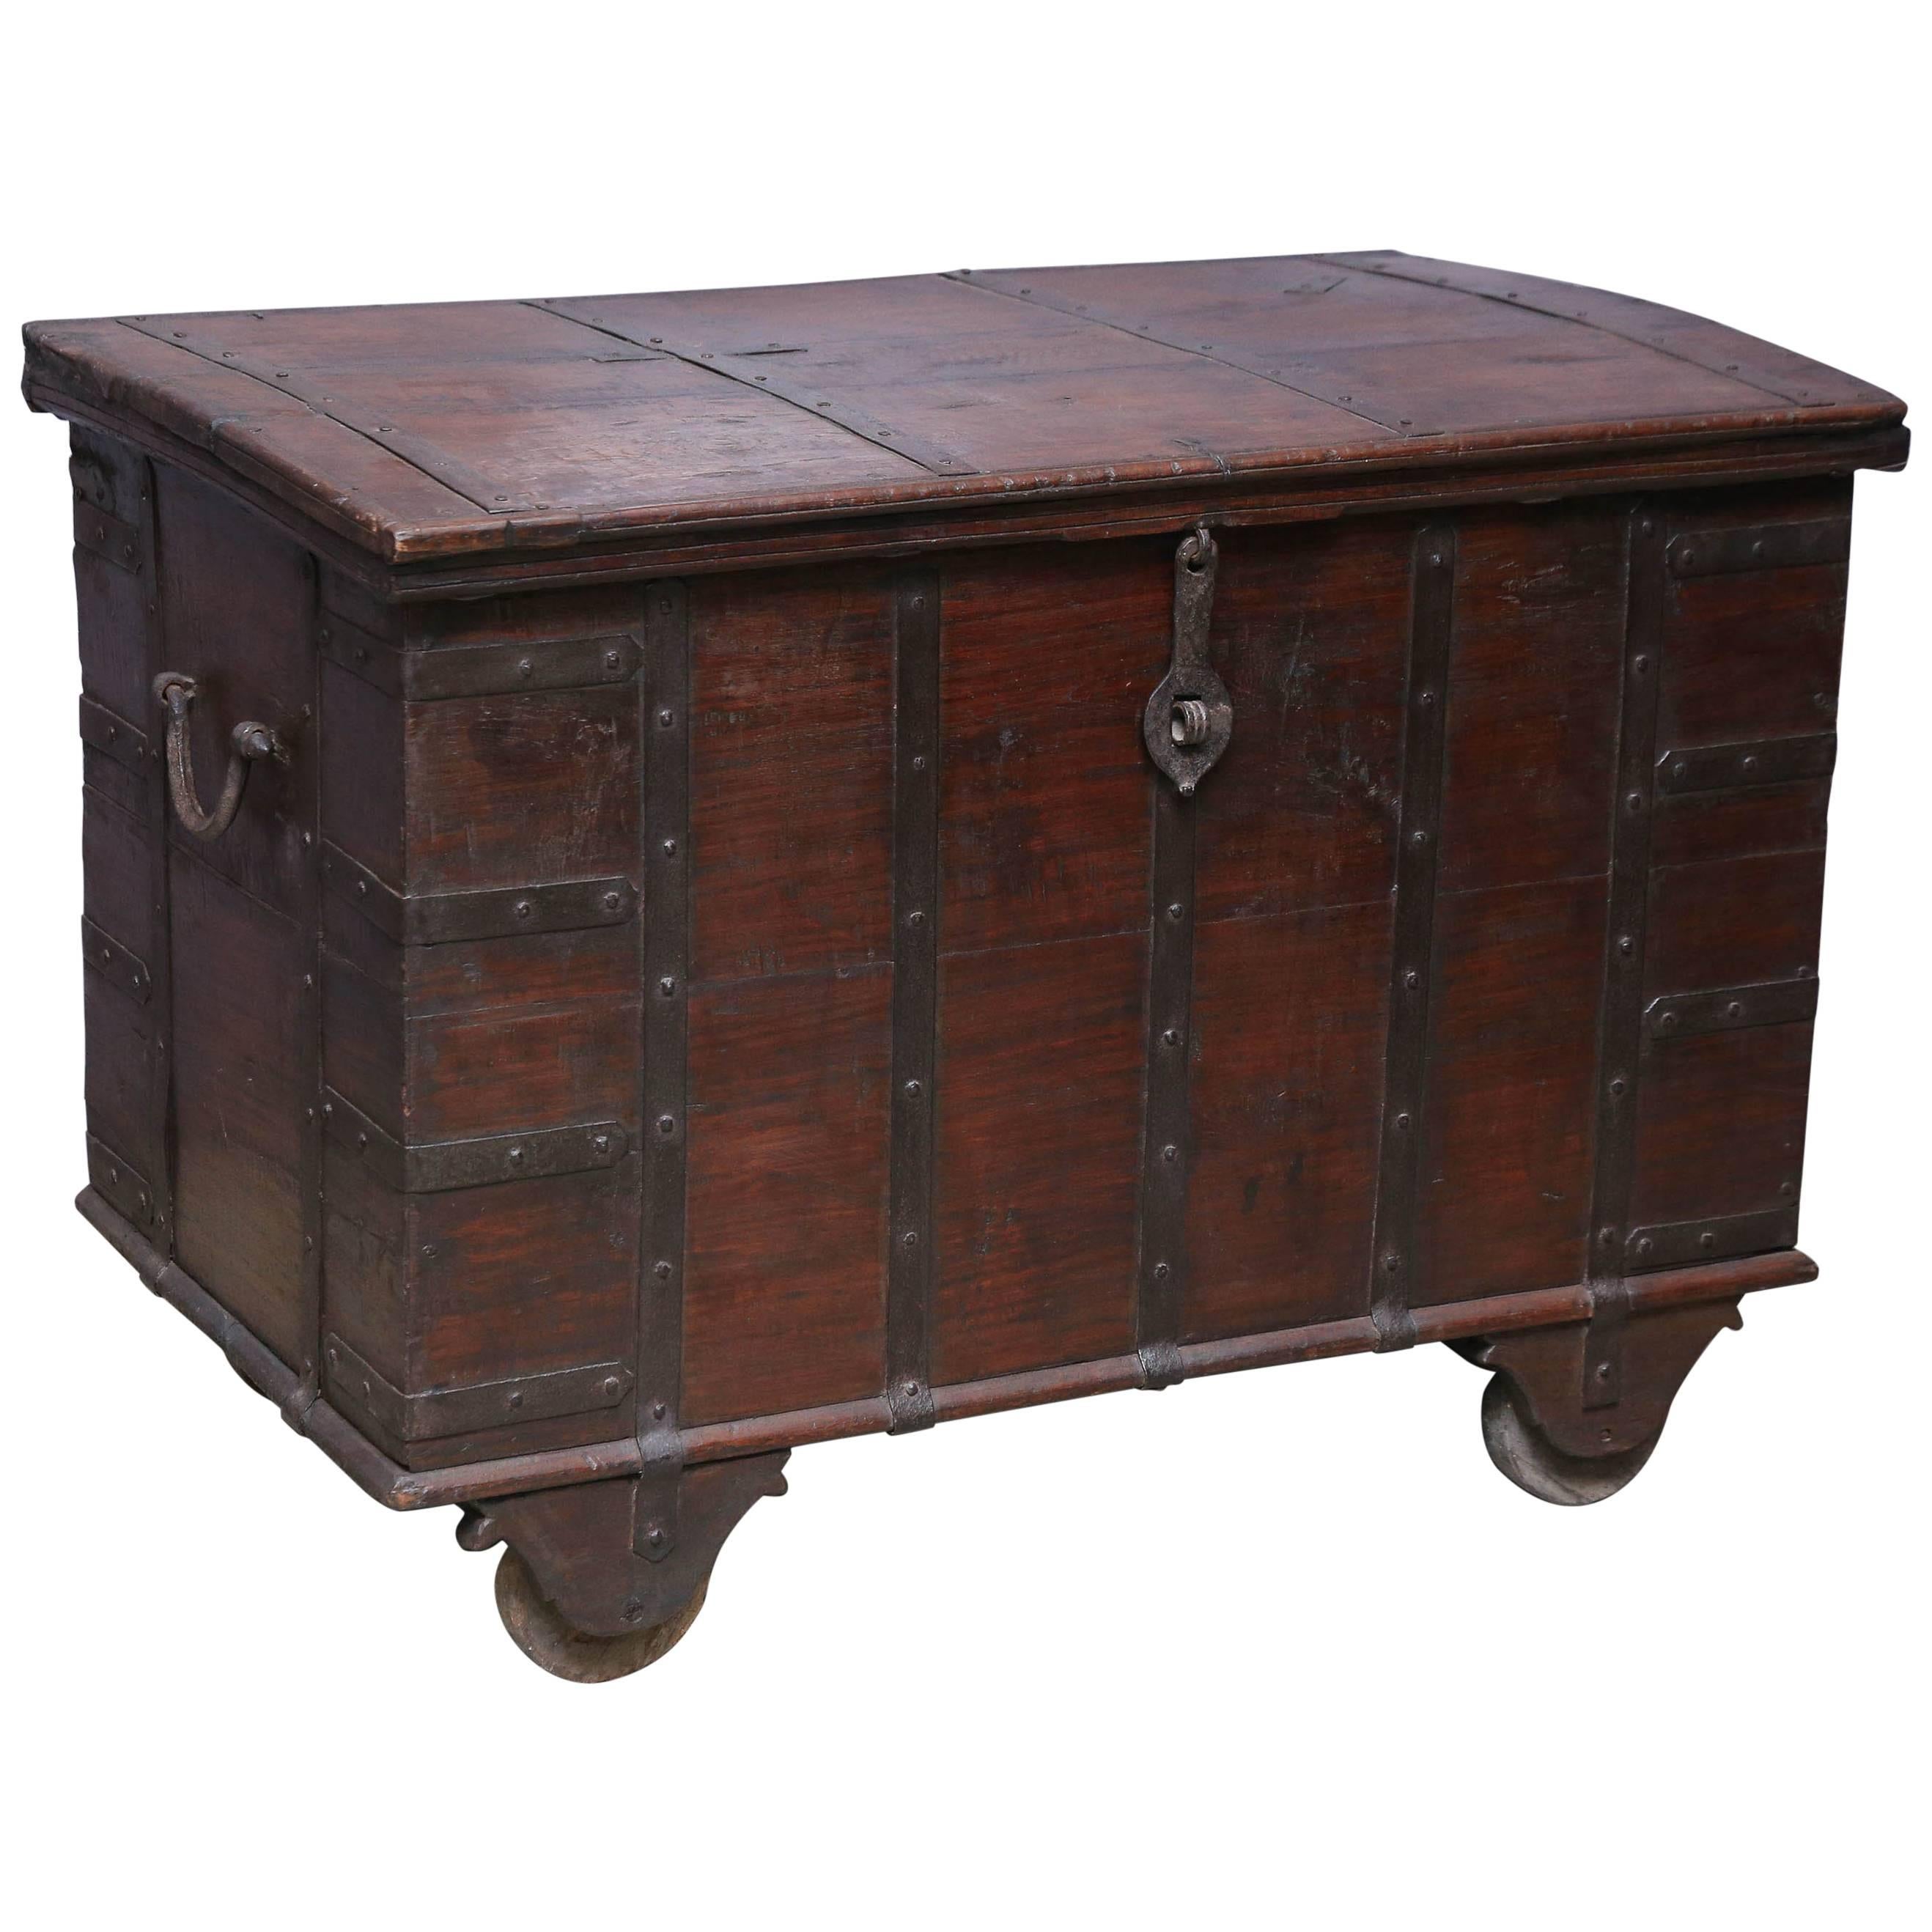 200 Years Old Solid Teak Wood Dowry Chest from a Central Indian Home For Sale